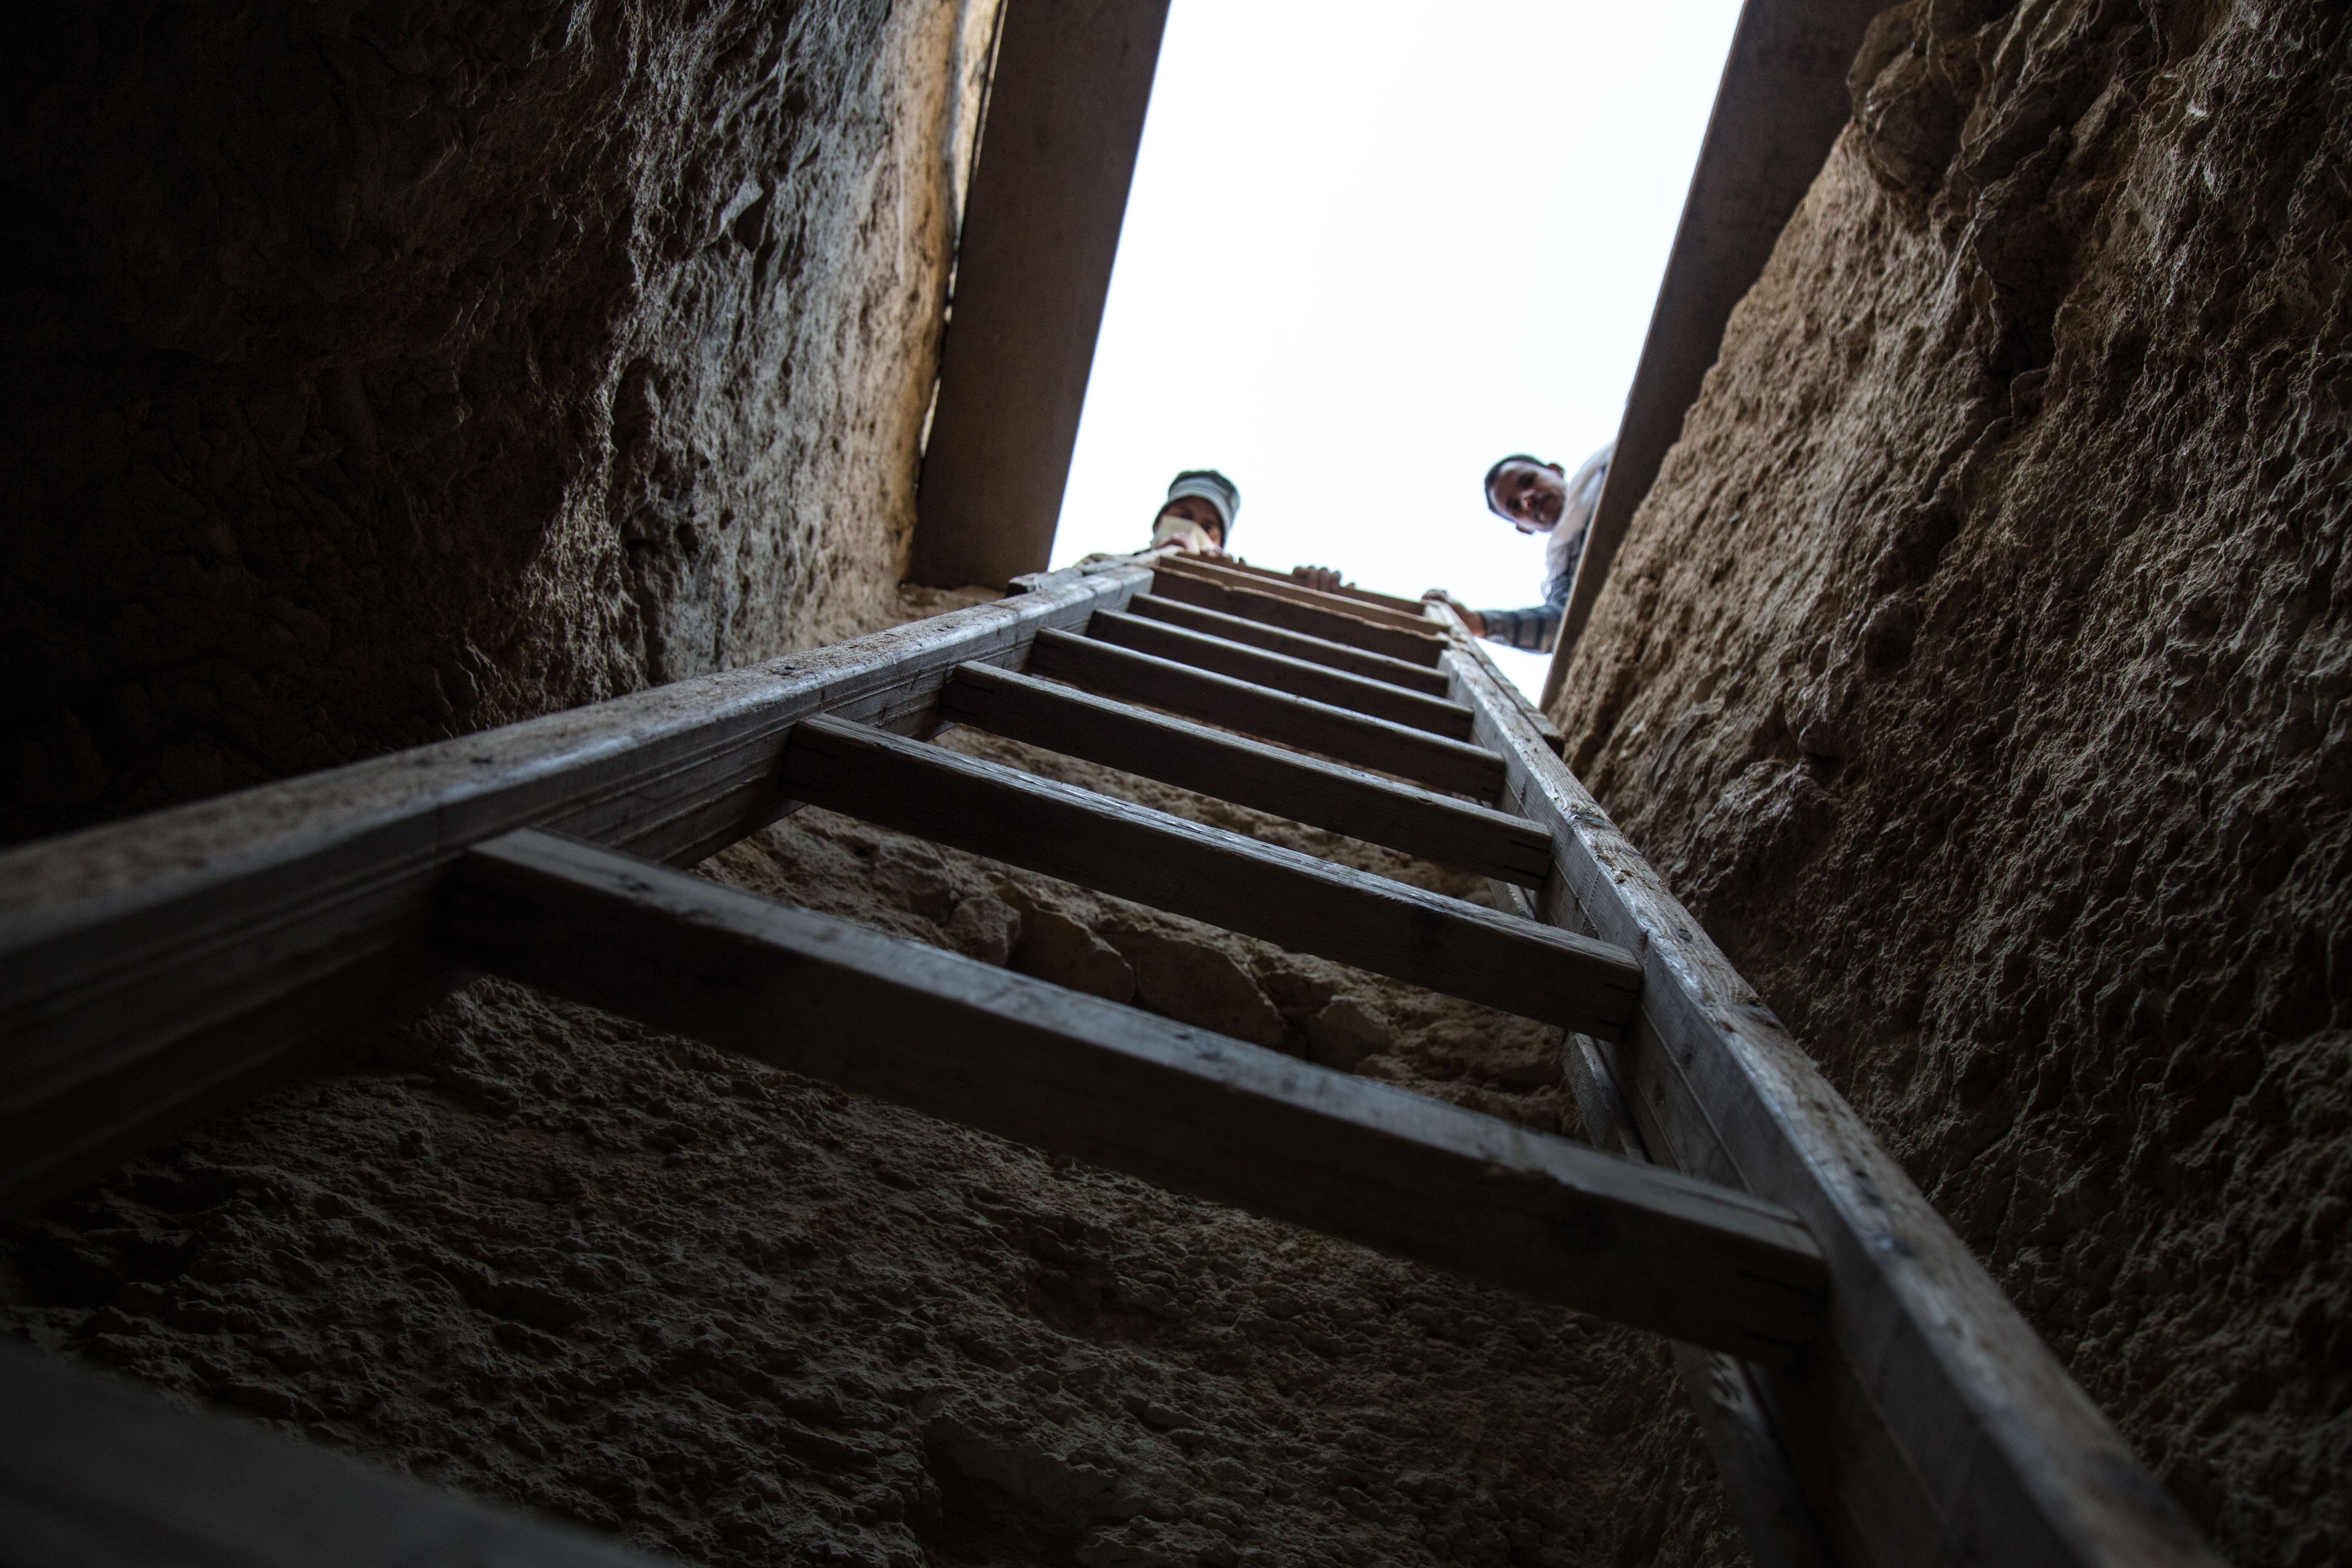 The view up the shaft that led to the newly discovered sarcophagi